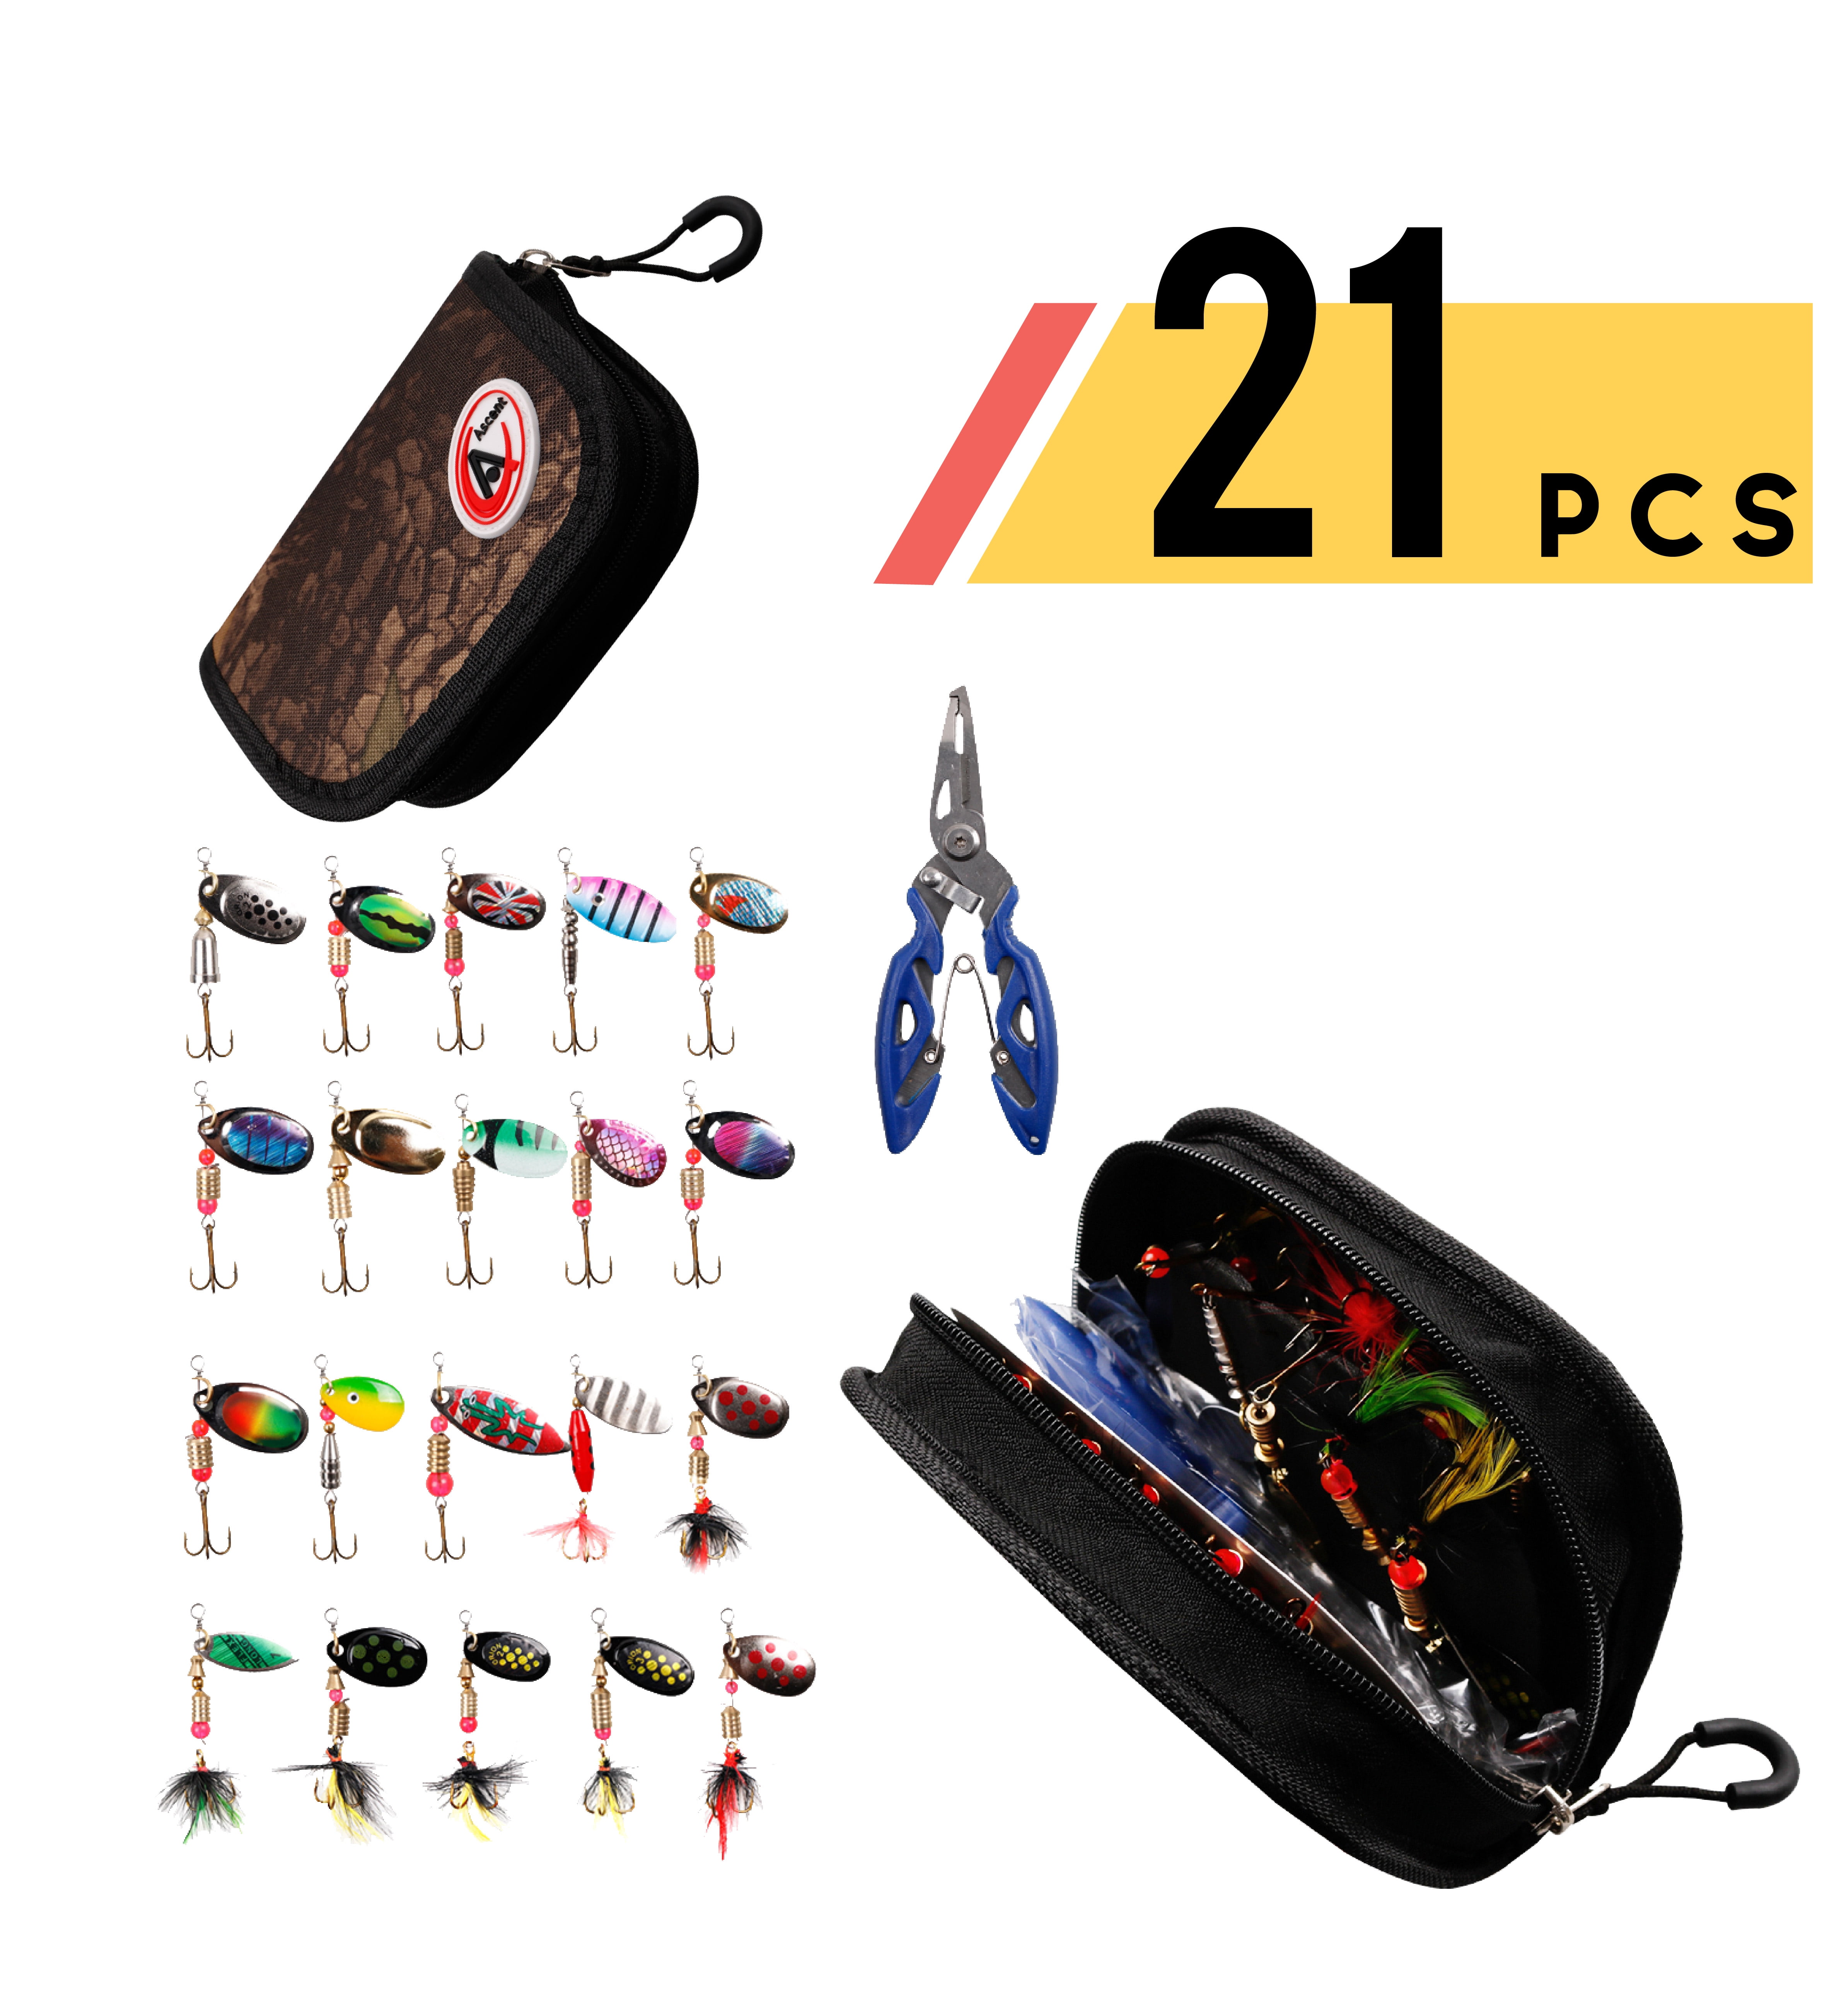 Ascent's Fisherman's Gift Lures Fishing Trout, Bass, Spinning Lures - 21  pcs Combo Set with Pliers, Line Cutter, Hook Remover Tool, Hard Metal  Spinner Baits Kit, Gift Idea for Father, Men, Women